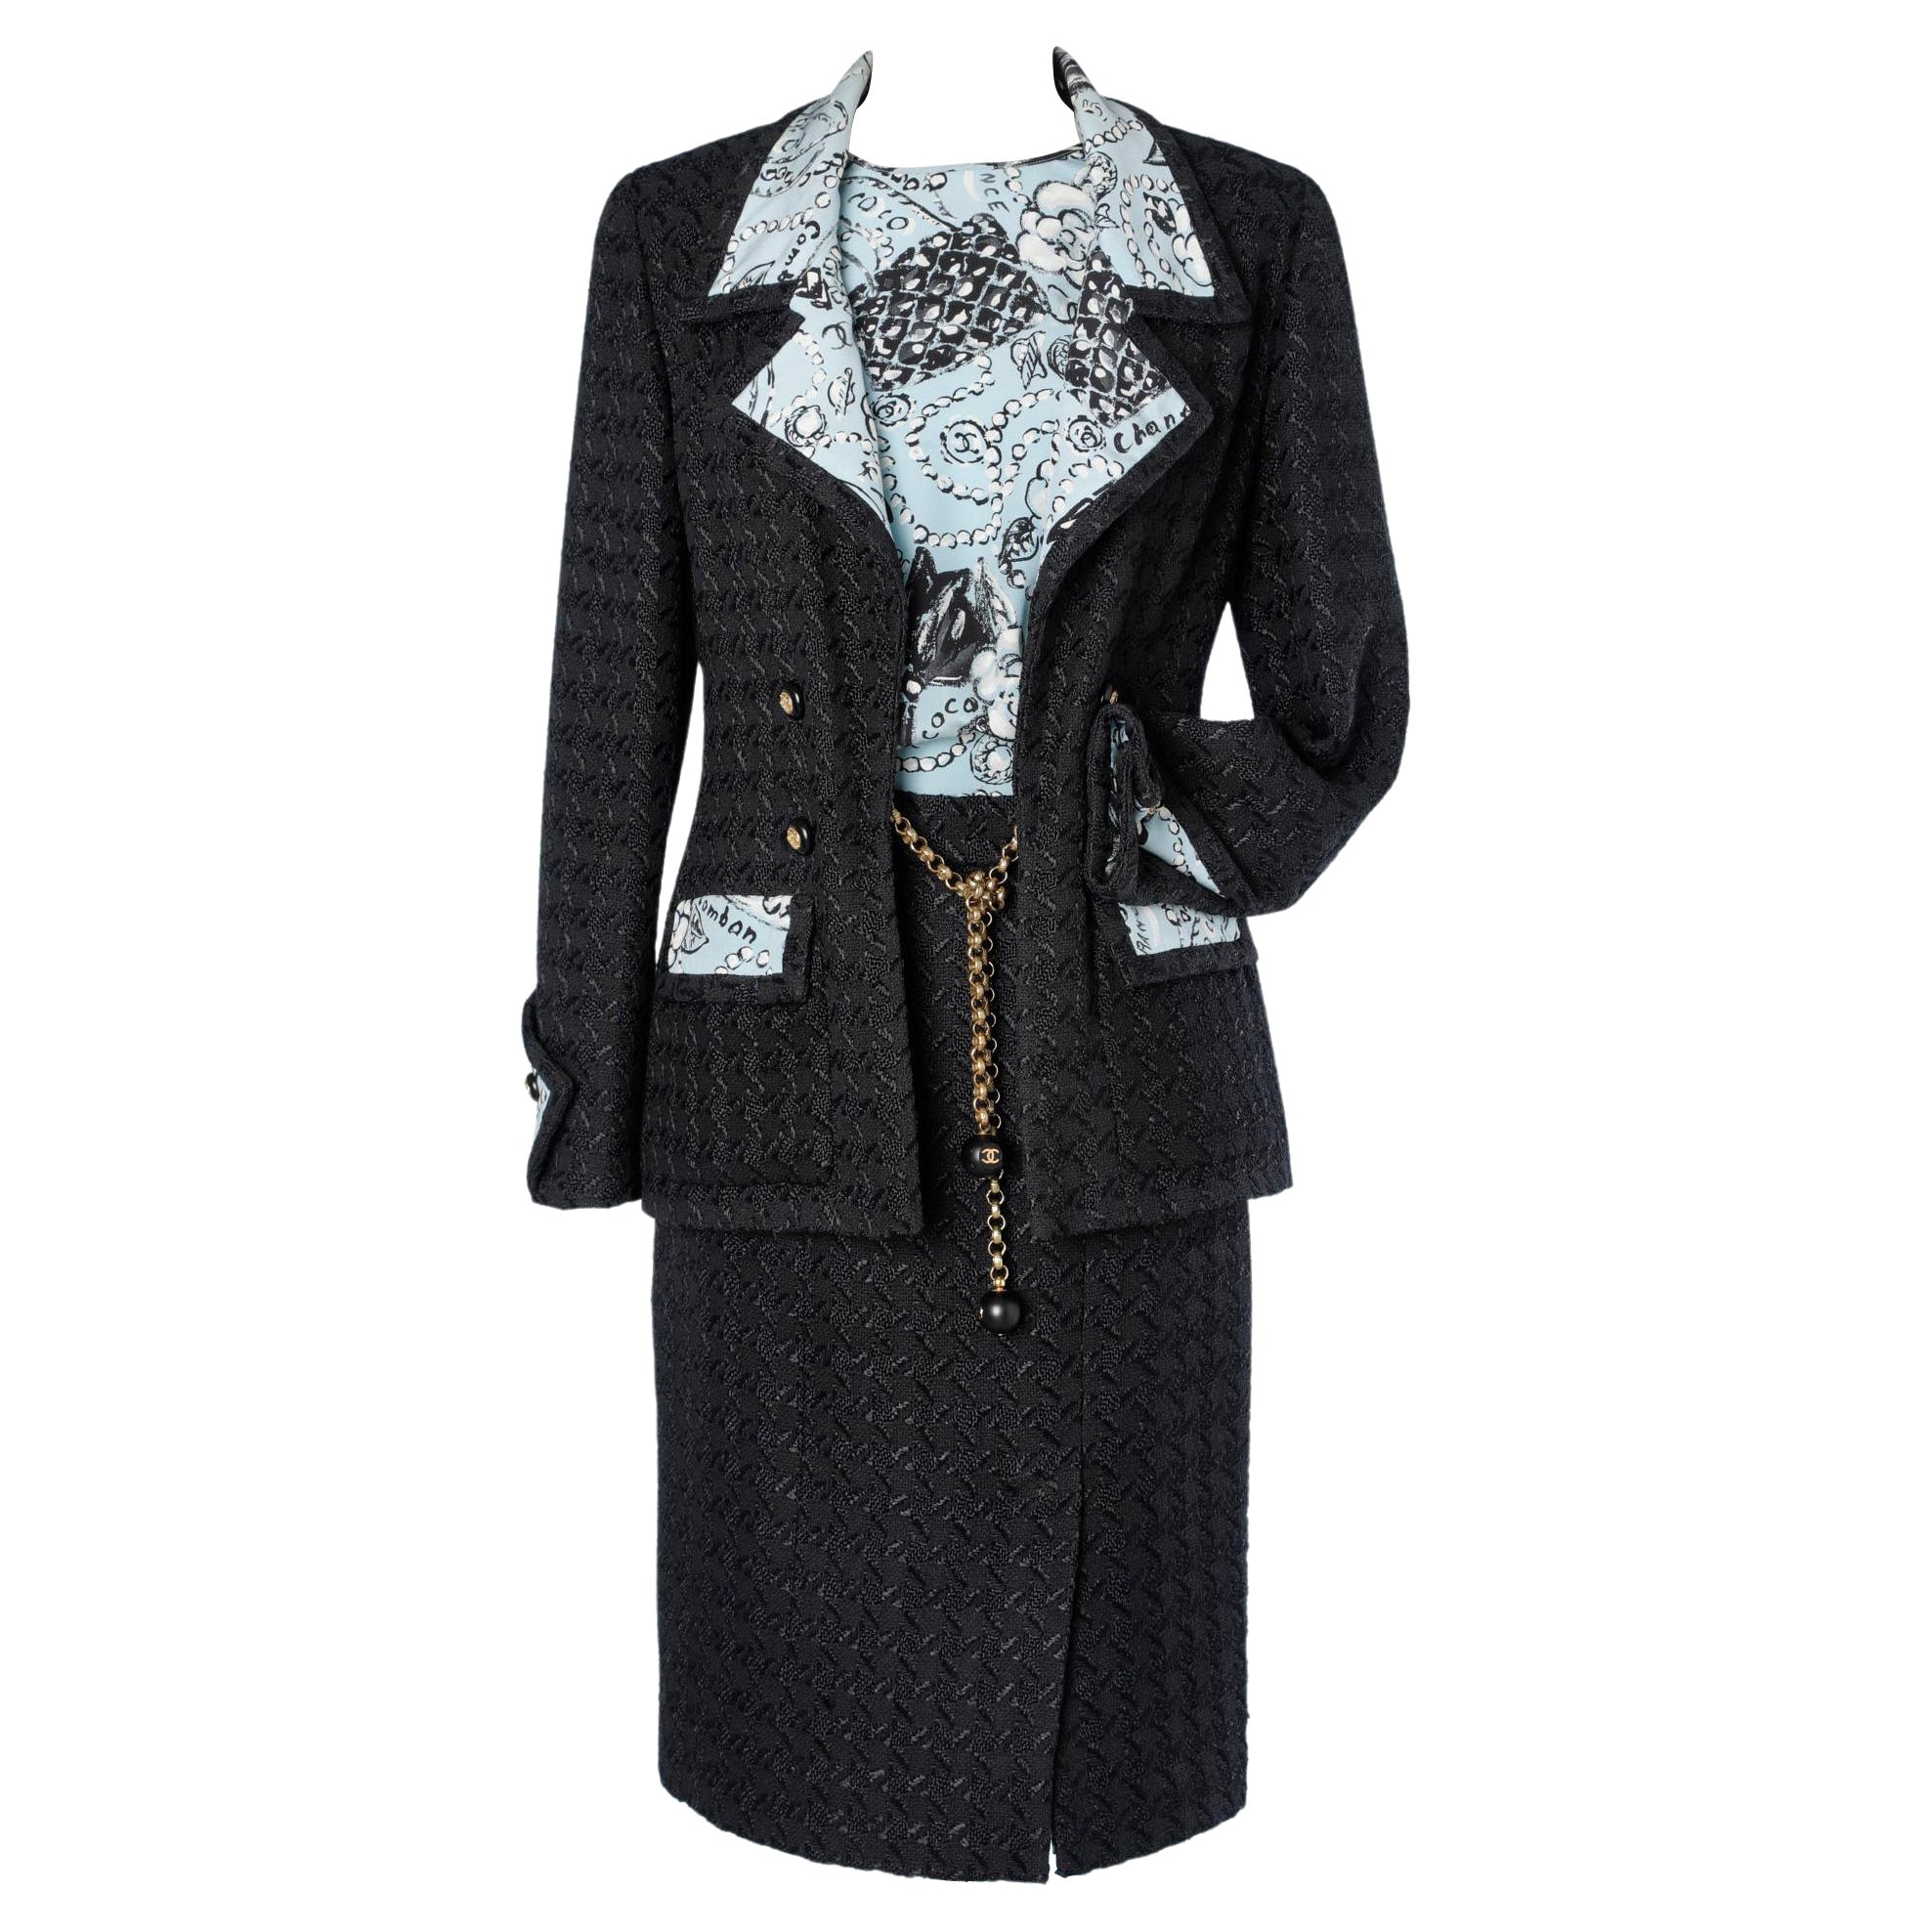 3 pieces skirt suit in navy blue wool and printed silk top SS 1993 Chanel 